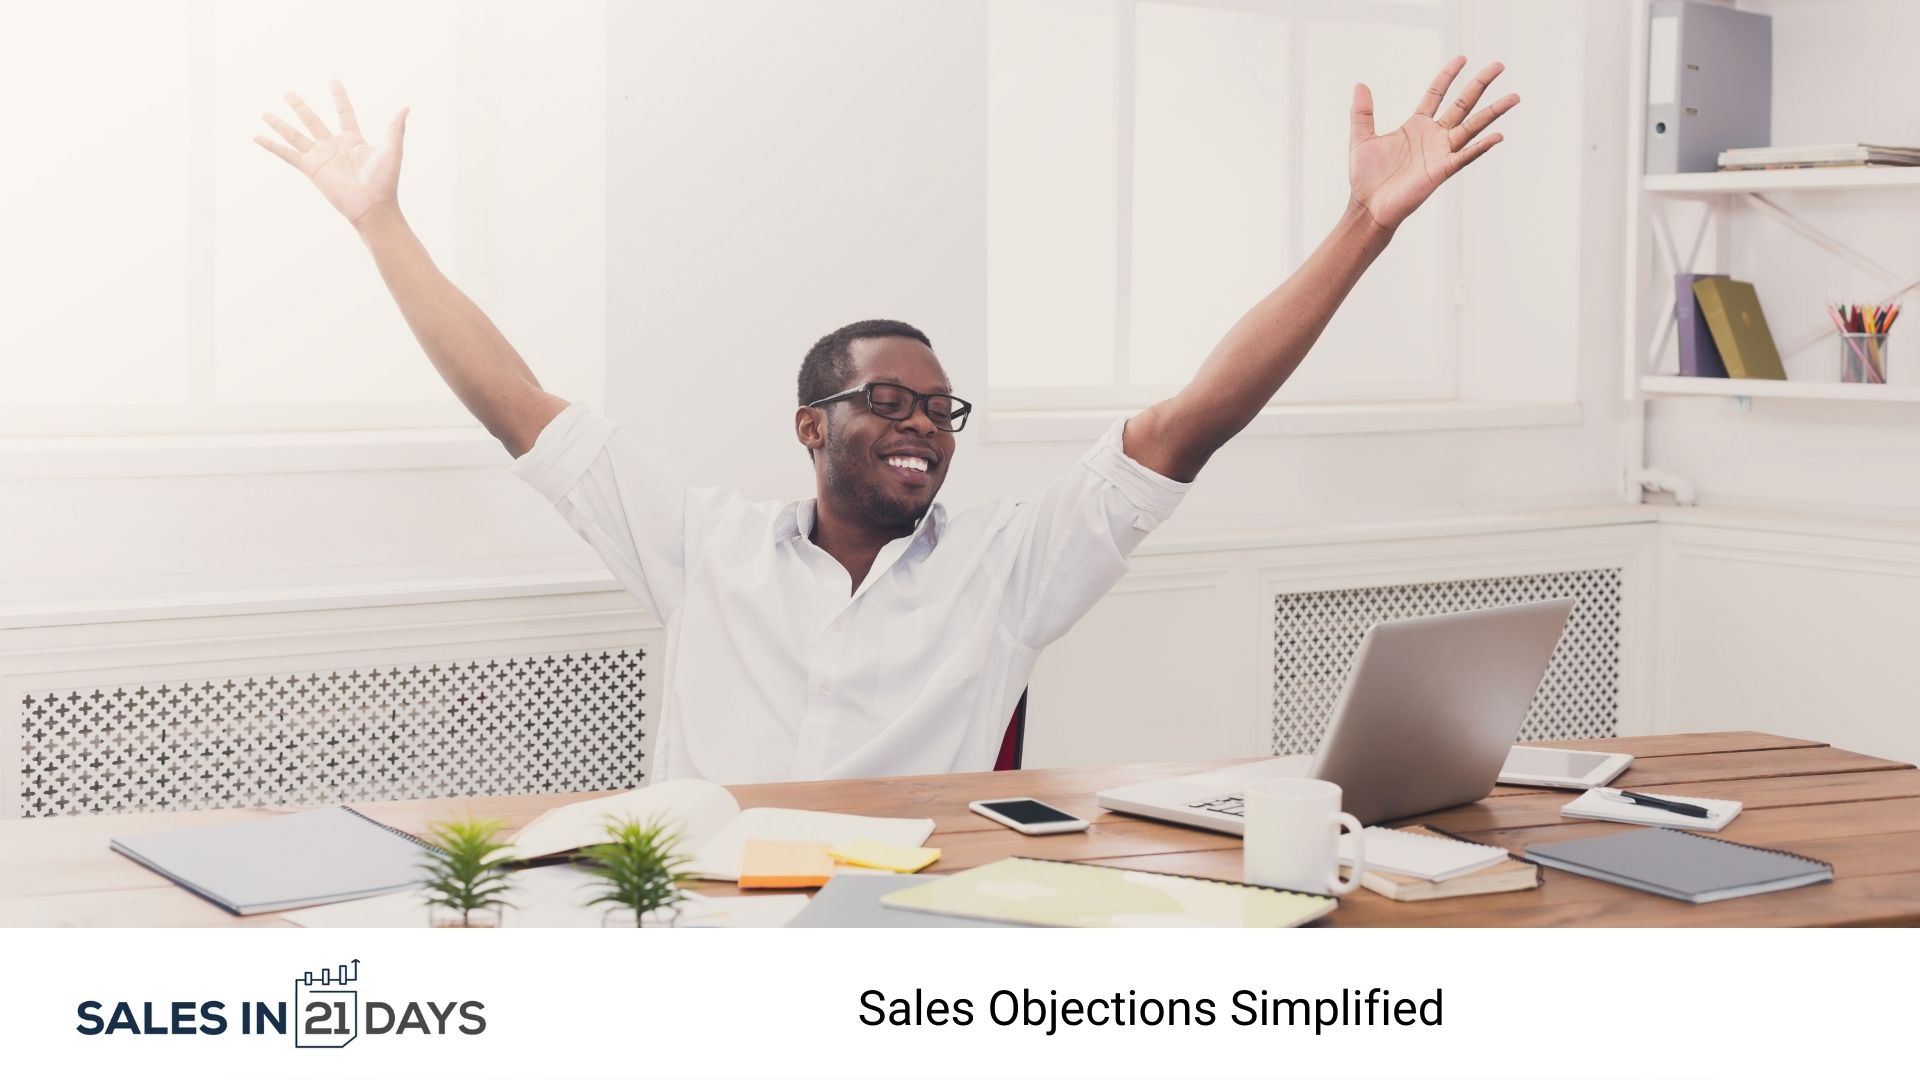 Sales Objections Simplified Sales In 21 Days